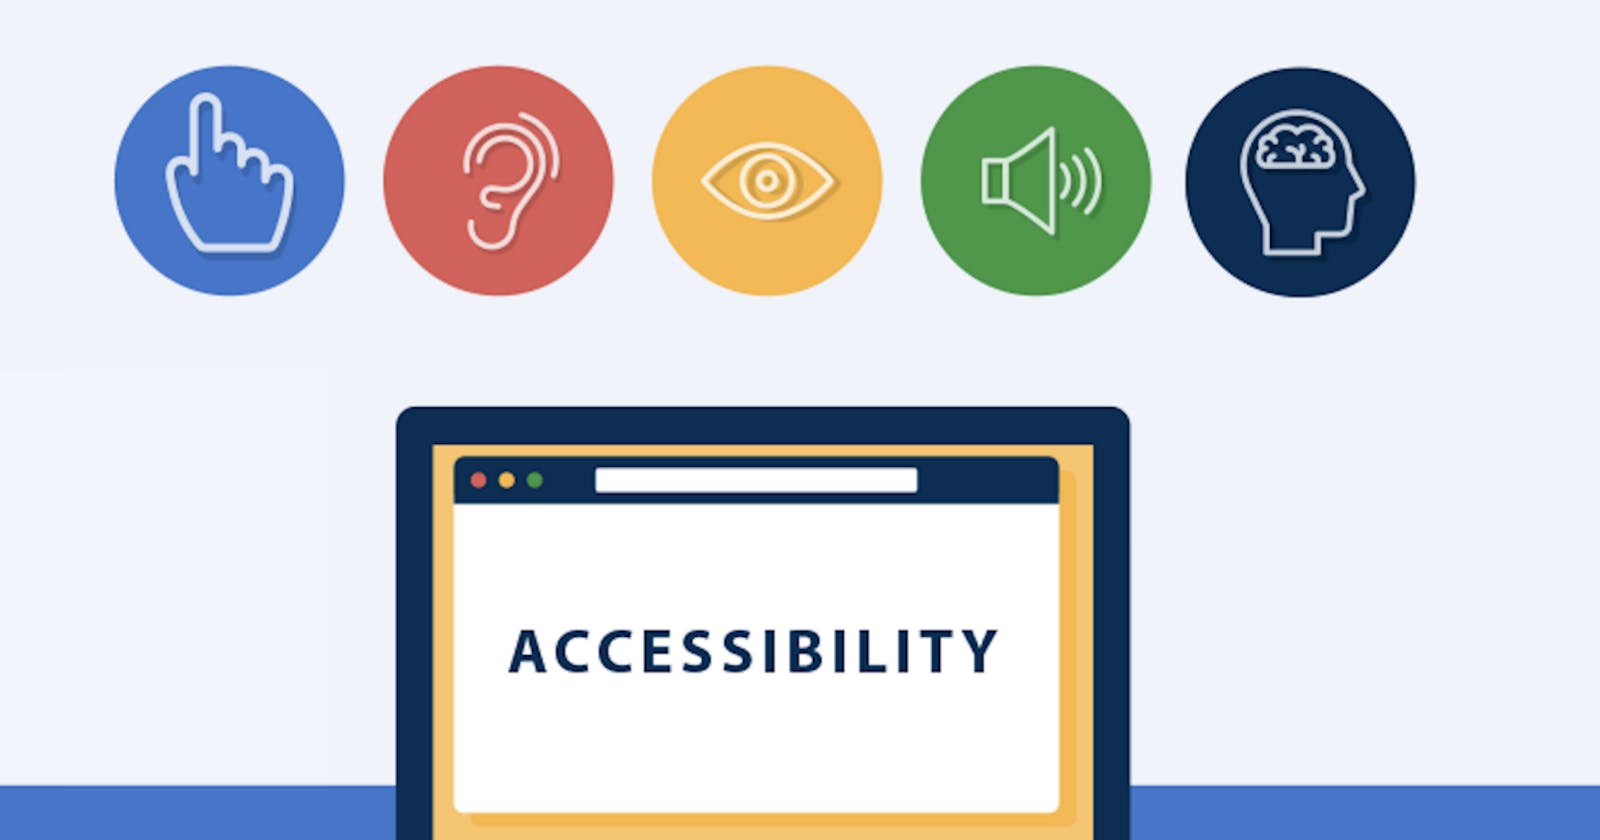 Web Accessibility: What it is and How to improve it